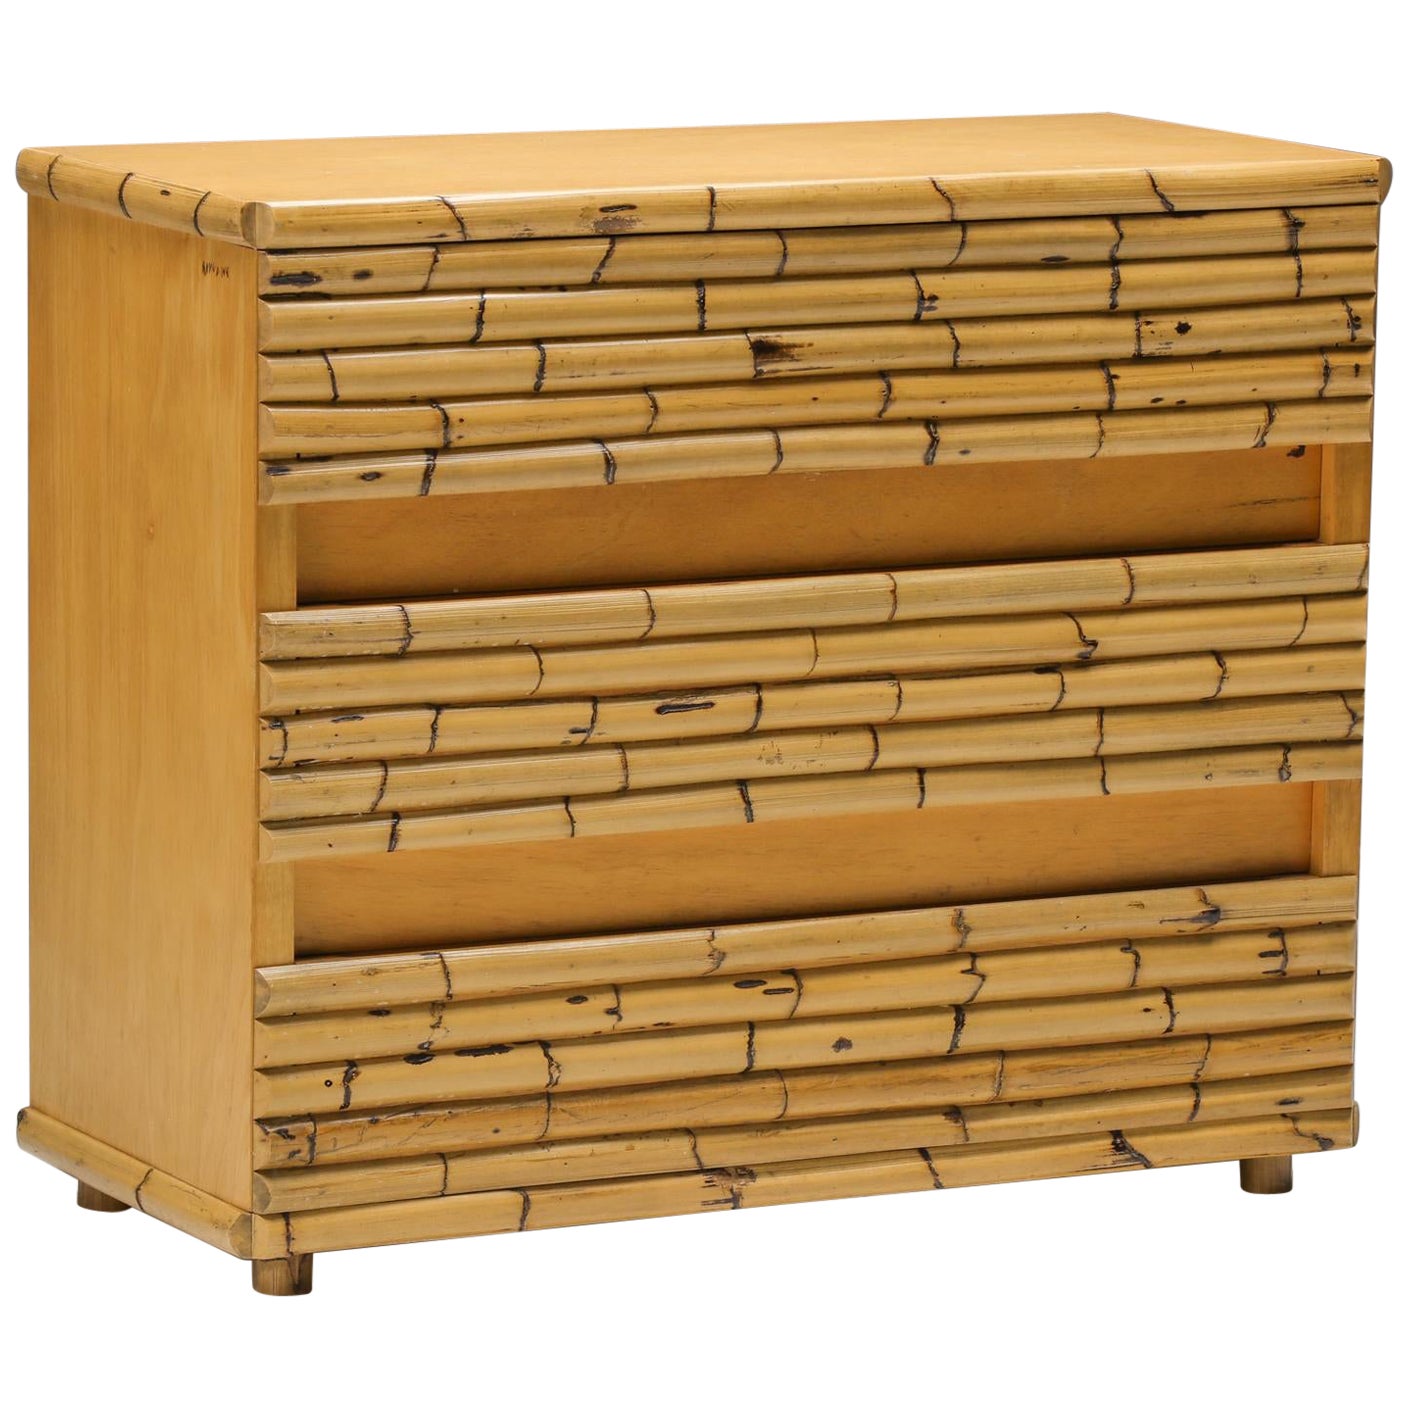 Bamboo Venturini Chest of Drawers, Hollywood Regency, 1970s For Sale